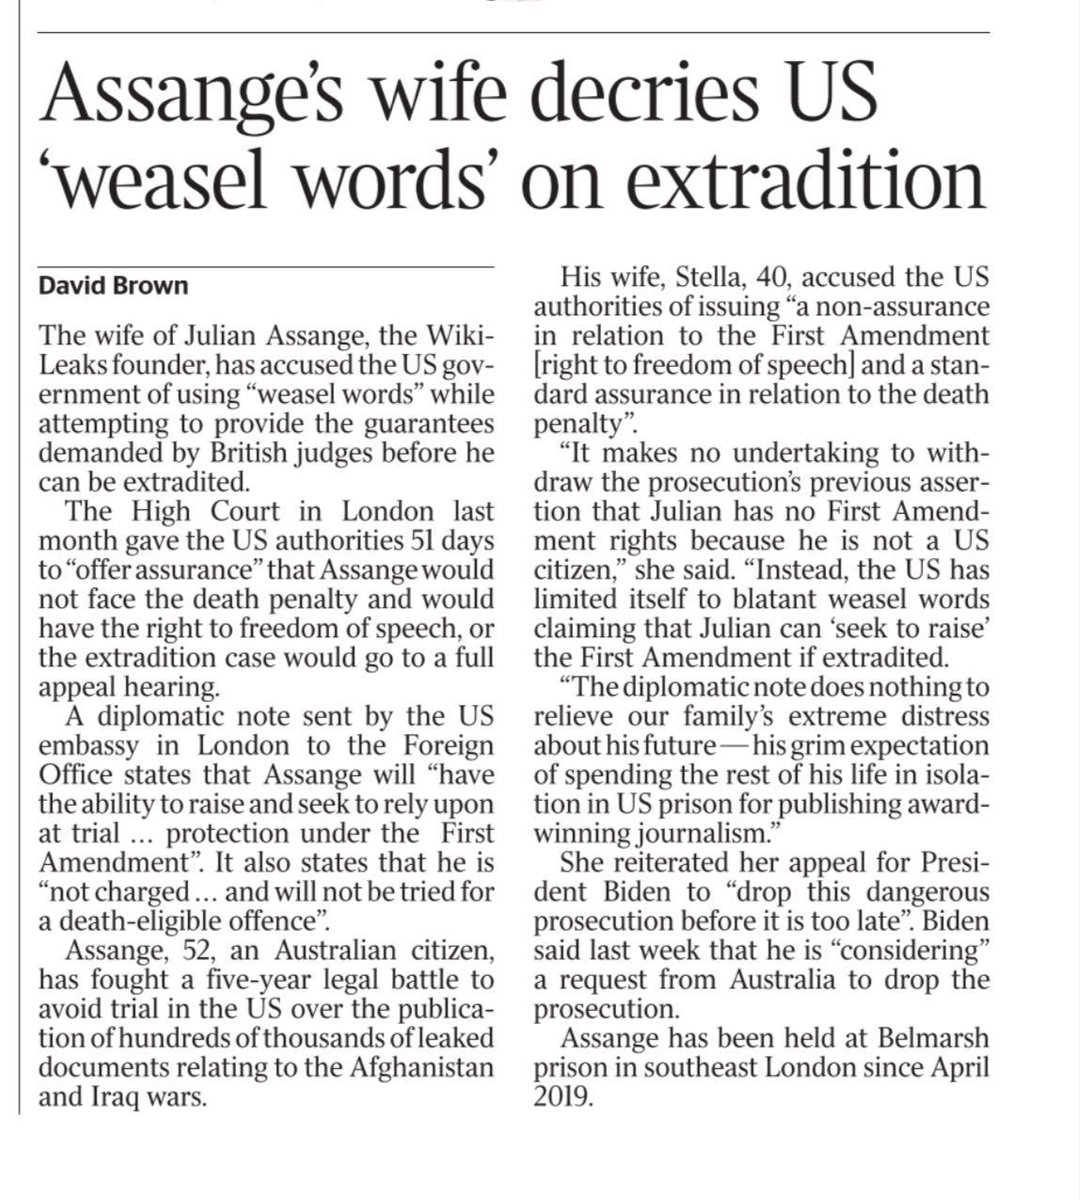 Stella Assange on US 'assurances': “The US has issued a non-assurance in relation to the First Amendment...weasel words claiming that Julian can 'seek to raise' the First Amendment if extradited' Extradition decision: Monday 20 May #FreeAssange